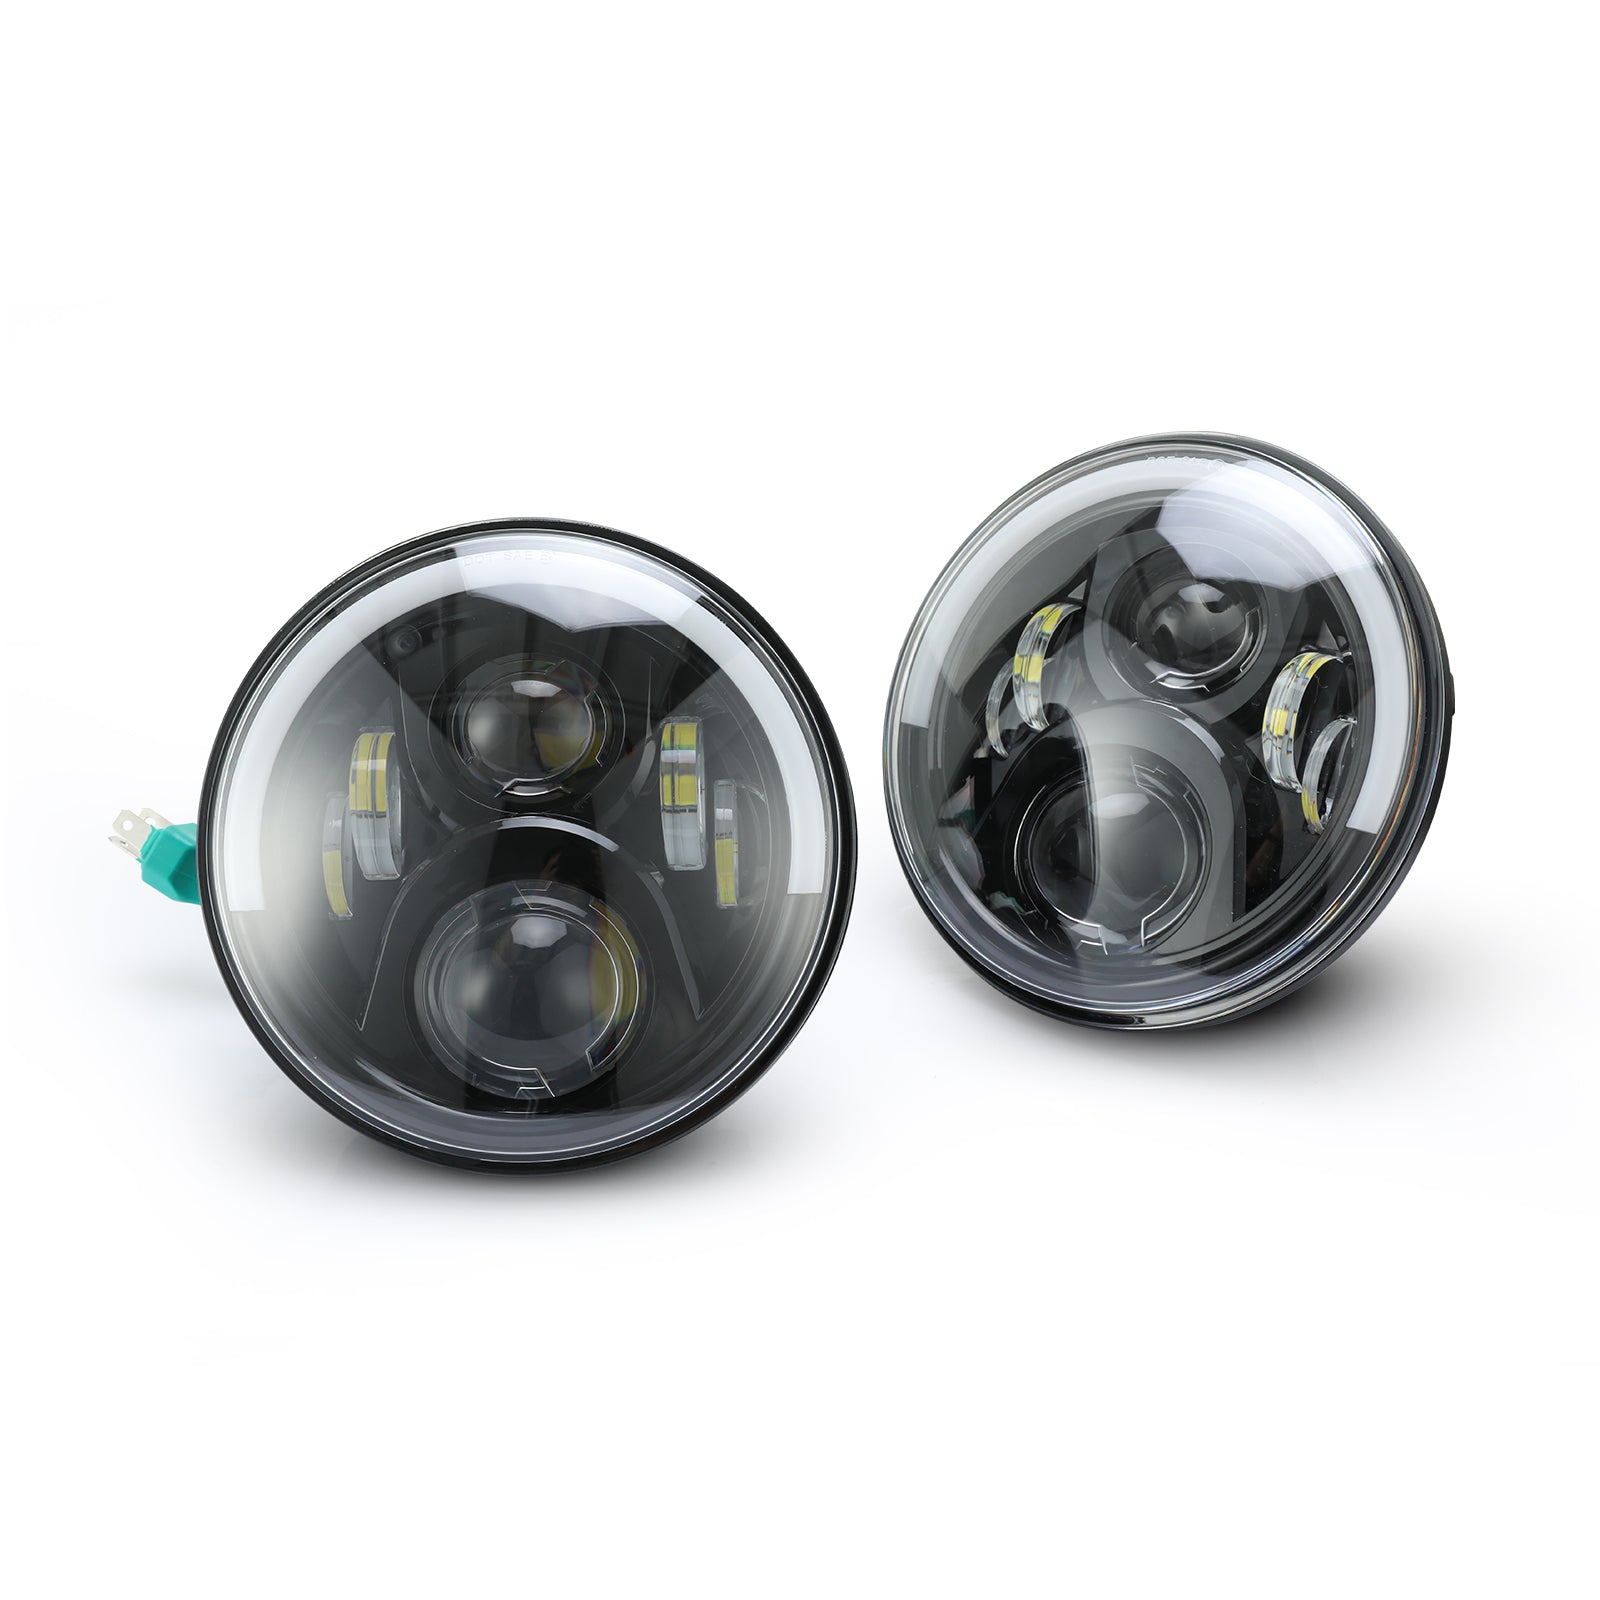 7-inch Round LED Head Light With Plug Compatible with Jeep Wrangler Jeep Cj Hummer Head Light OPENROAD   